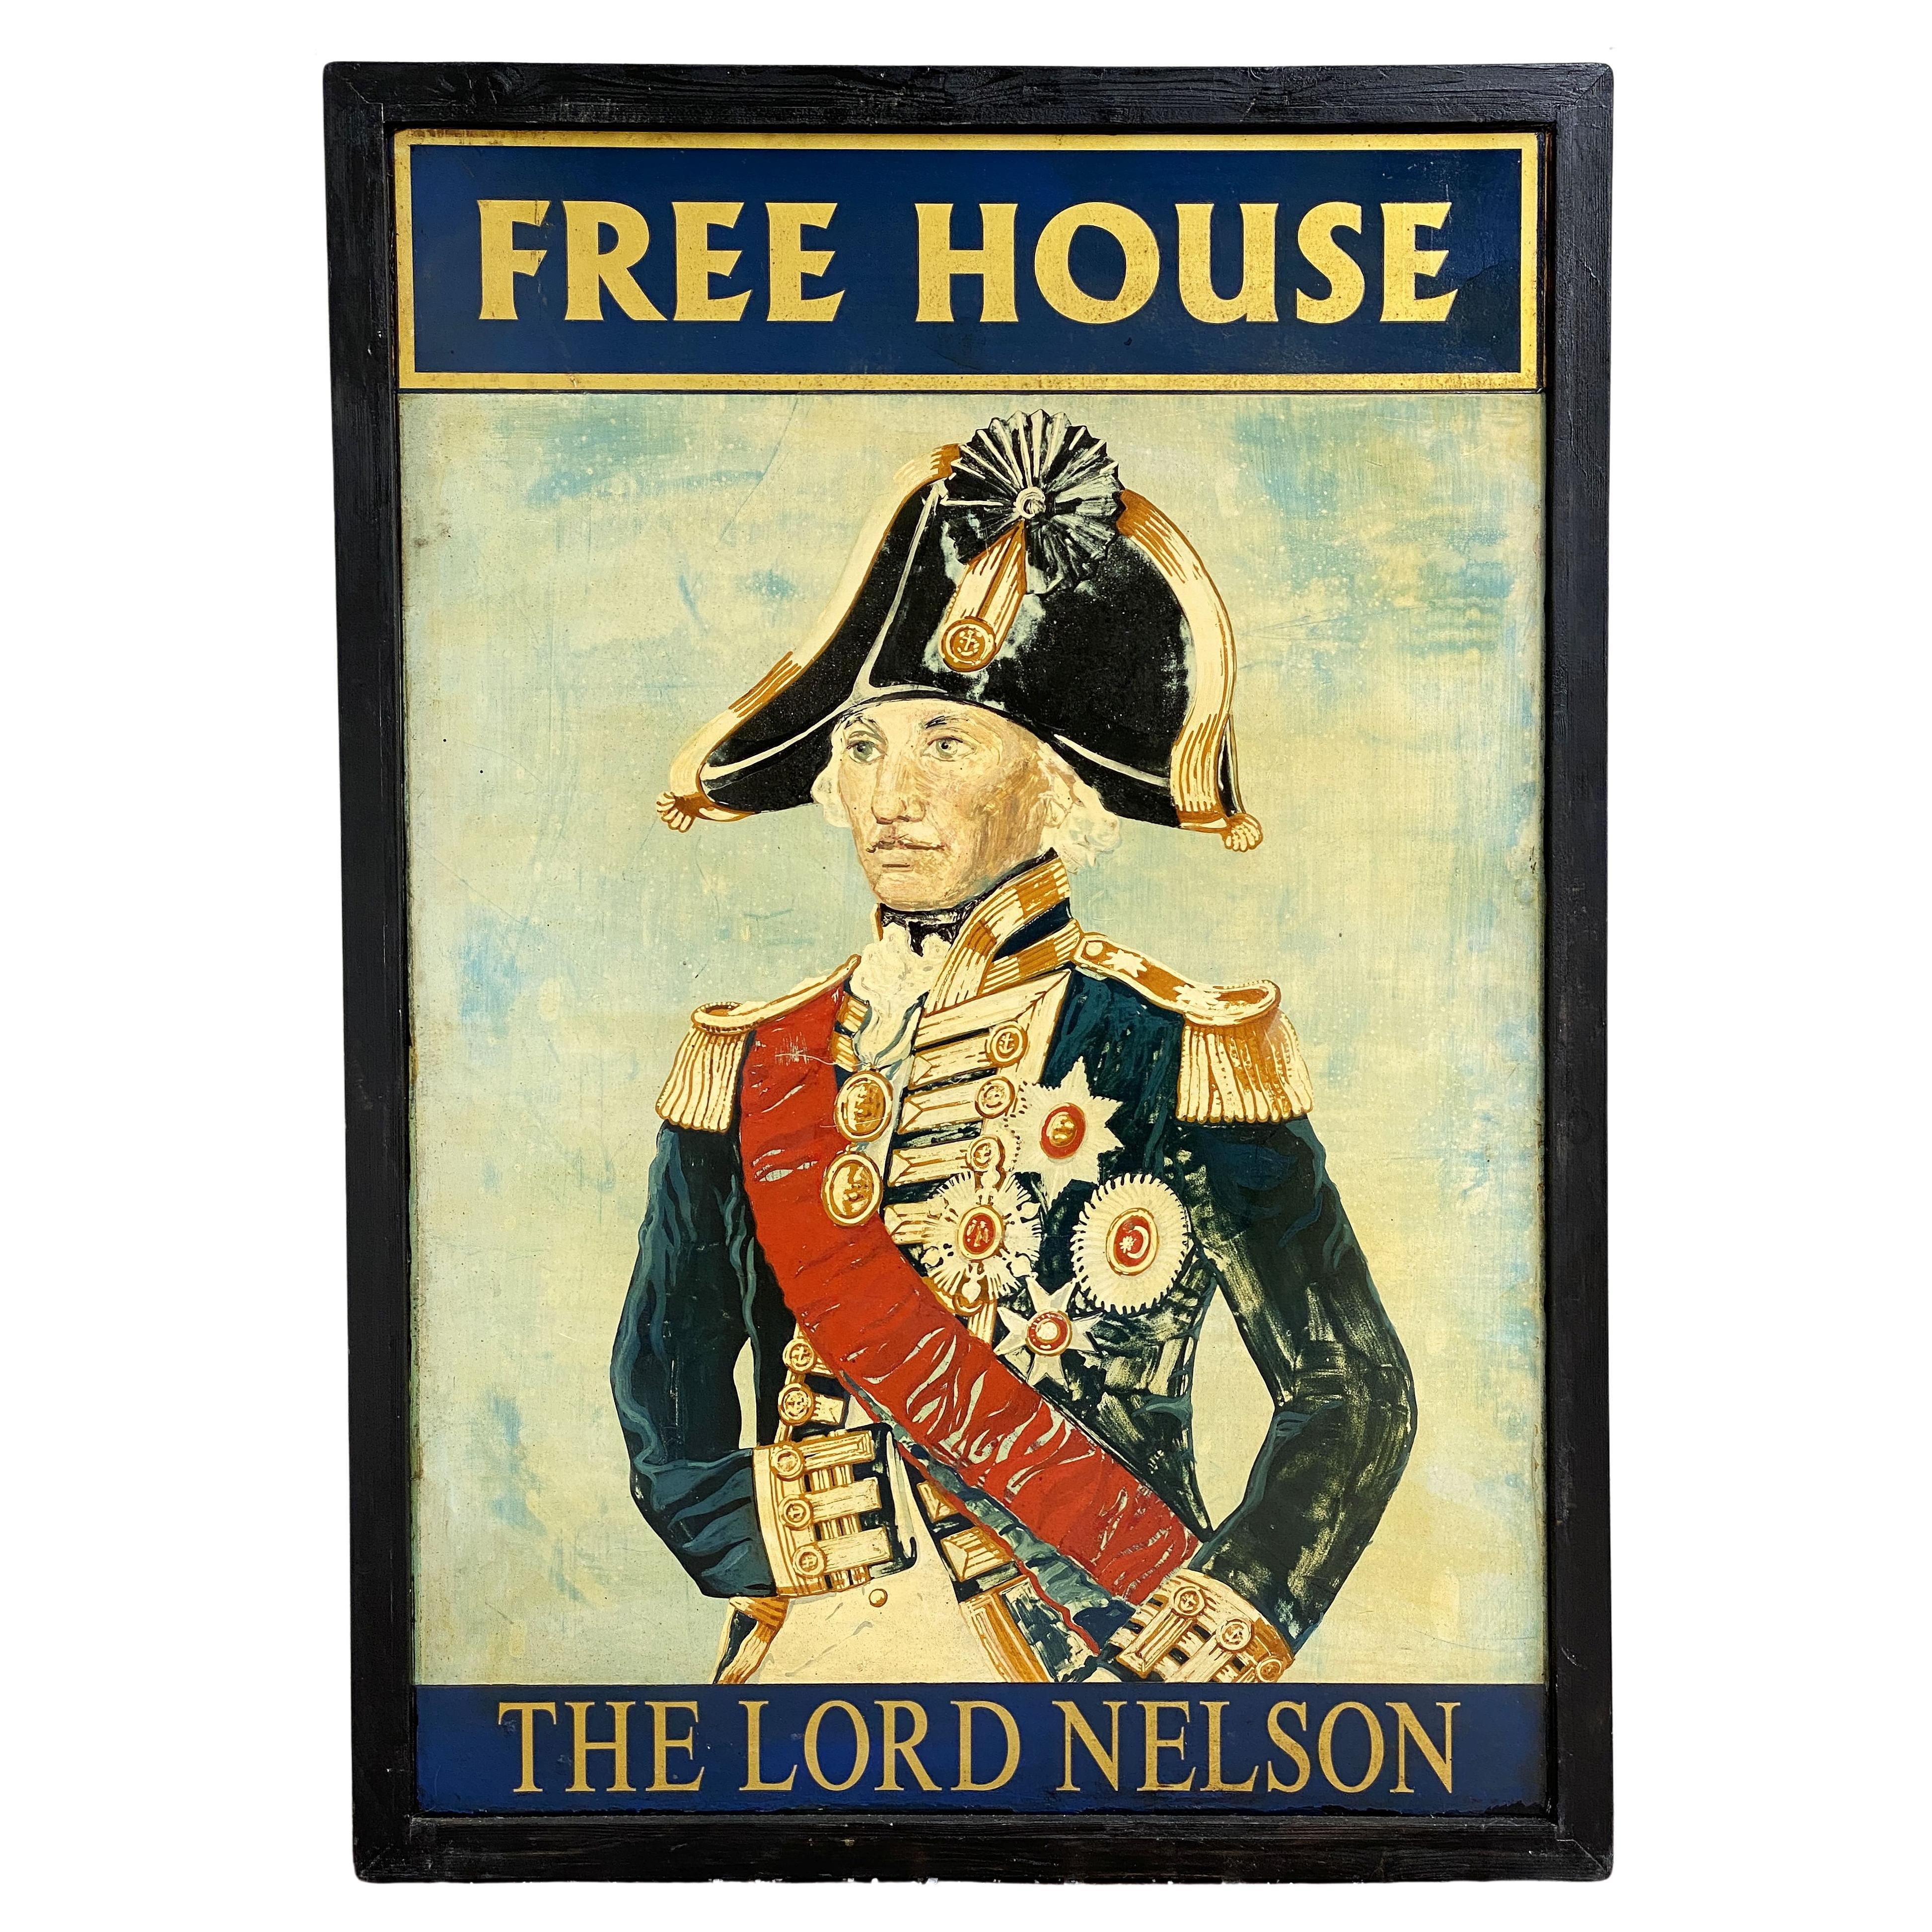 English Pub Sign, "Free House - The Lord Nelson"